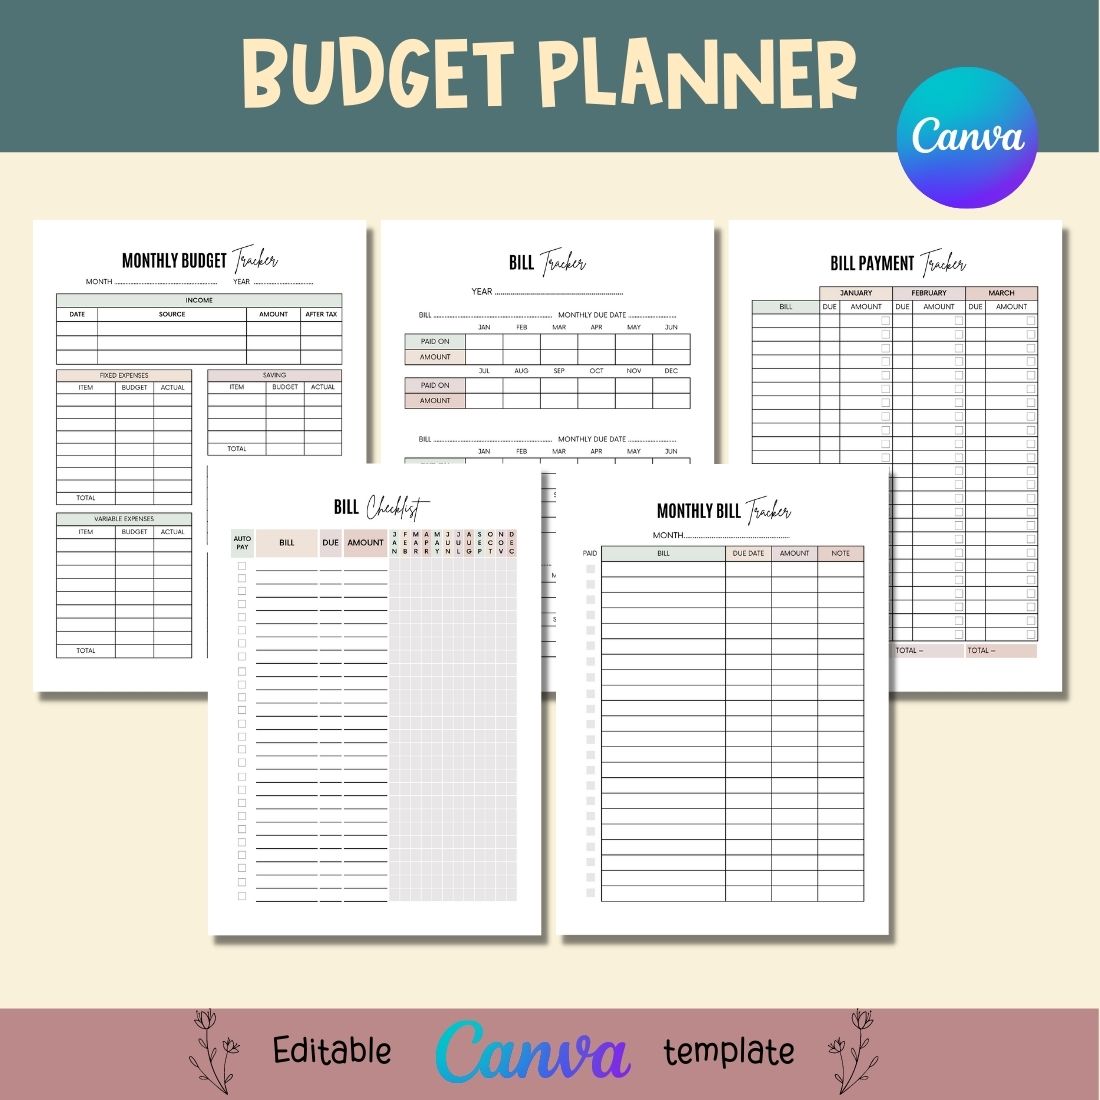 Budget Planner Canva Templates preview image.